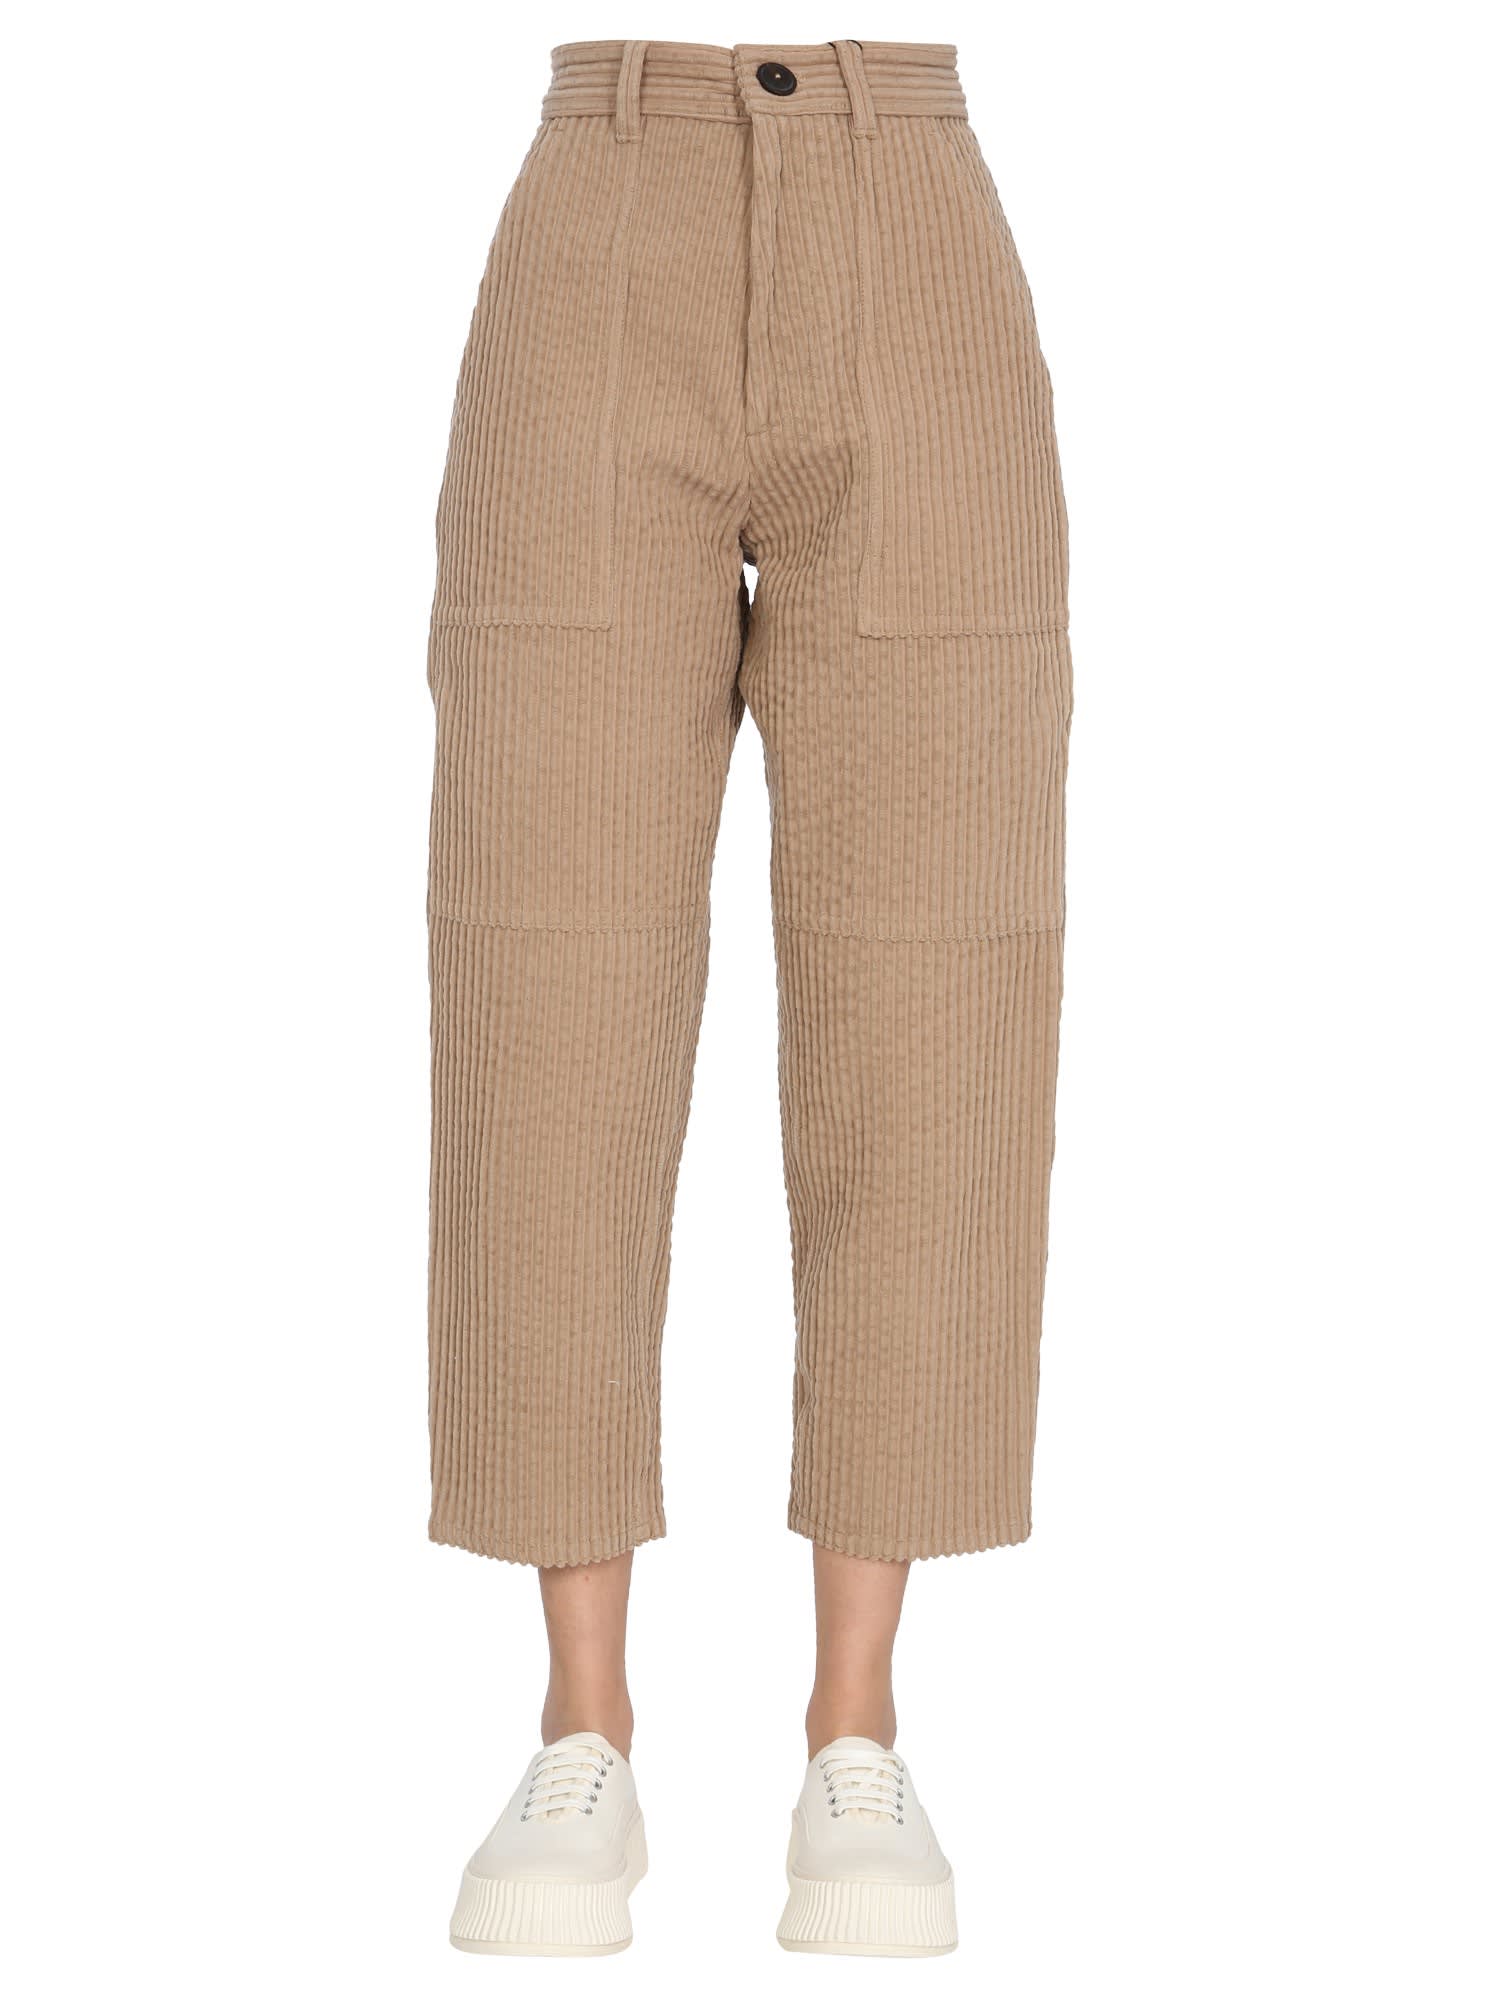 Ami Alexandre Mattiussi Worked Fit Trousers